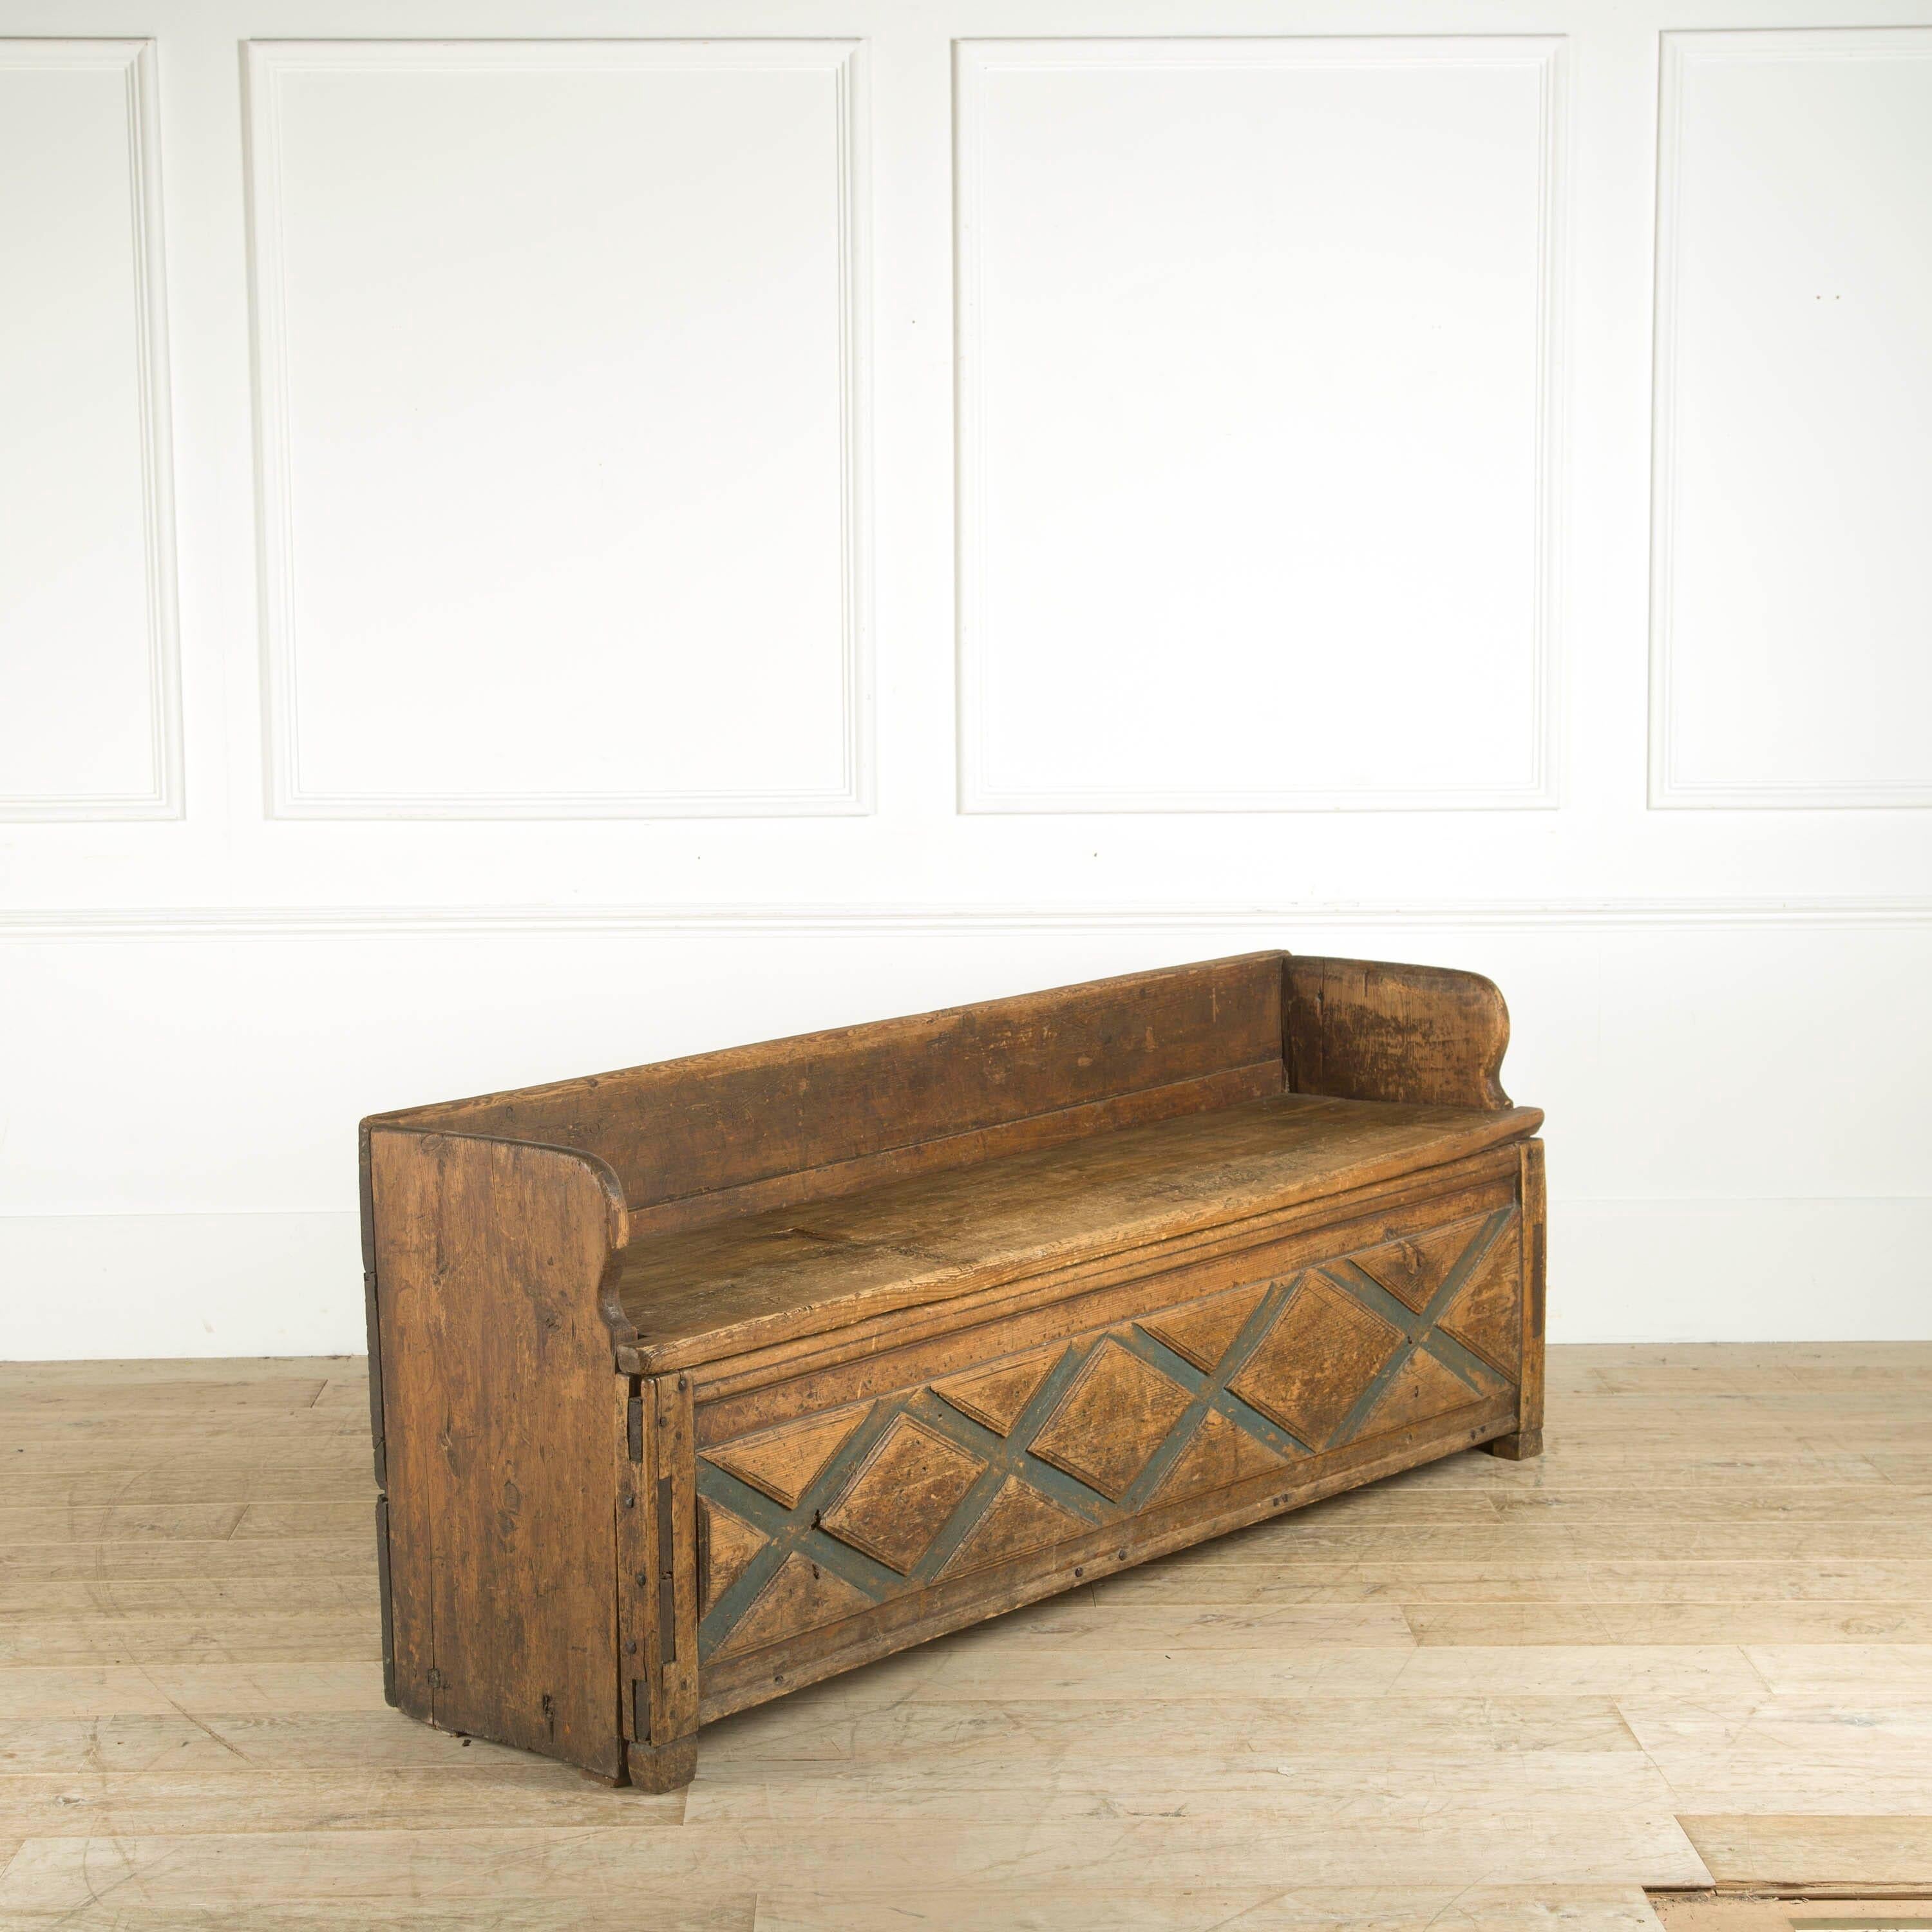 A rustic Folk Art bench (FÃ¥llbÃ_nk) from Dalarna. The FÃ¥llbÃ_nk or bench has a foldable seat and offers plenty of storage underneath.